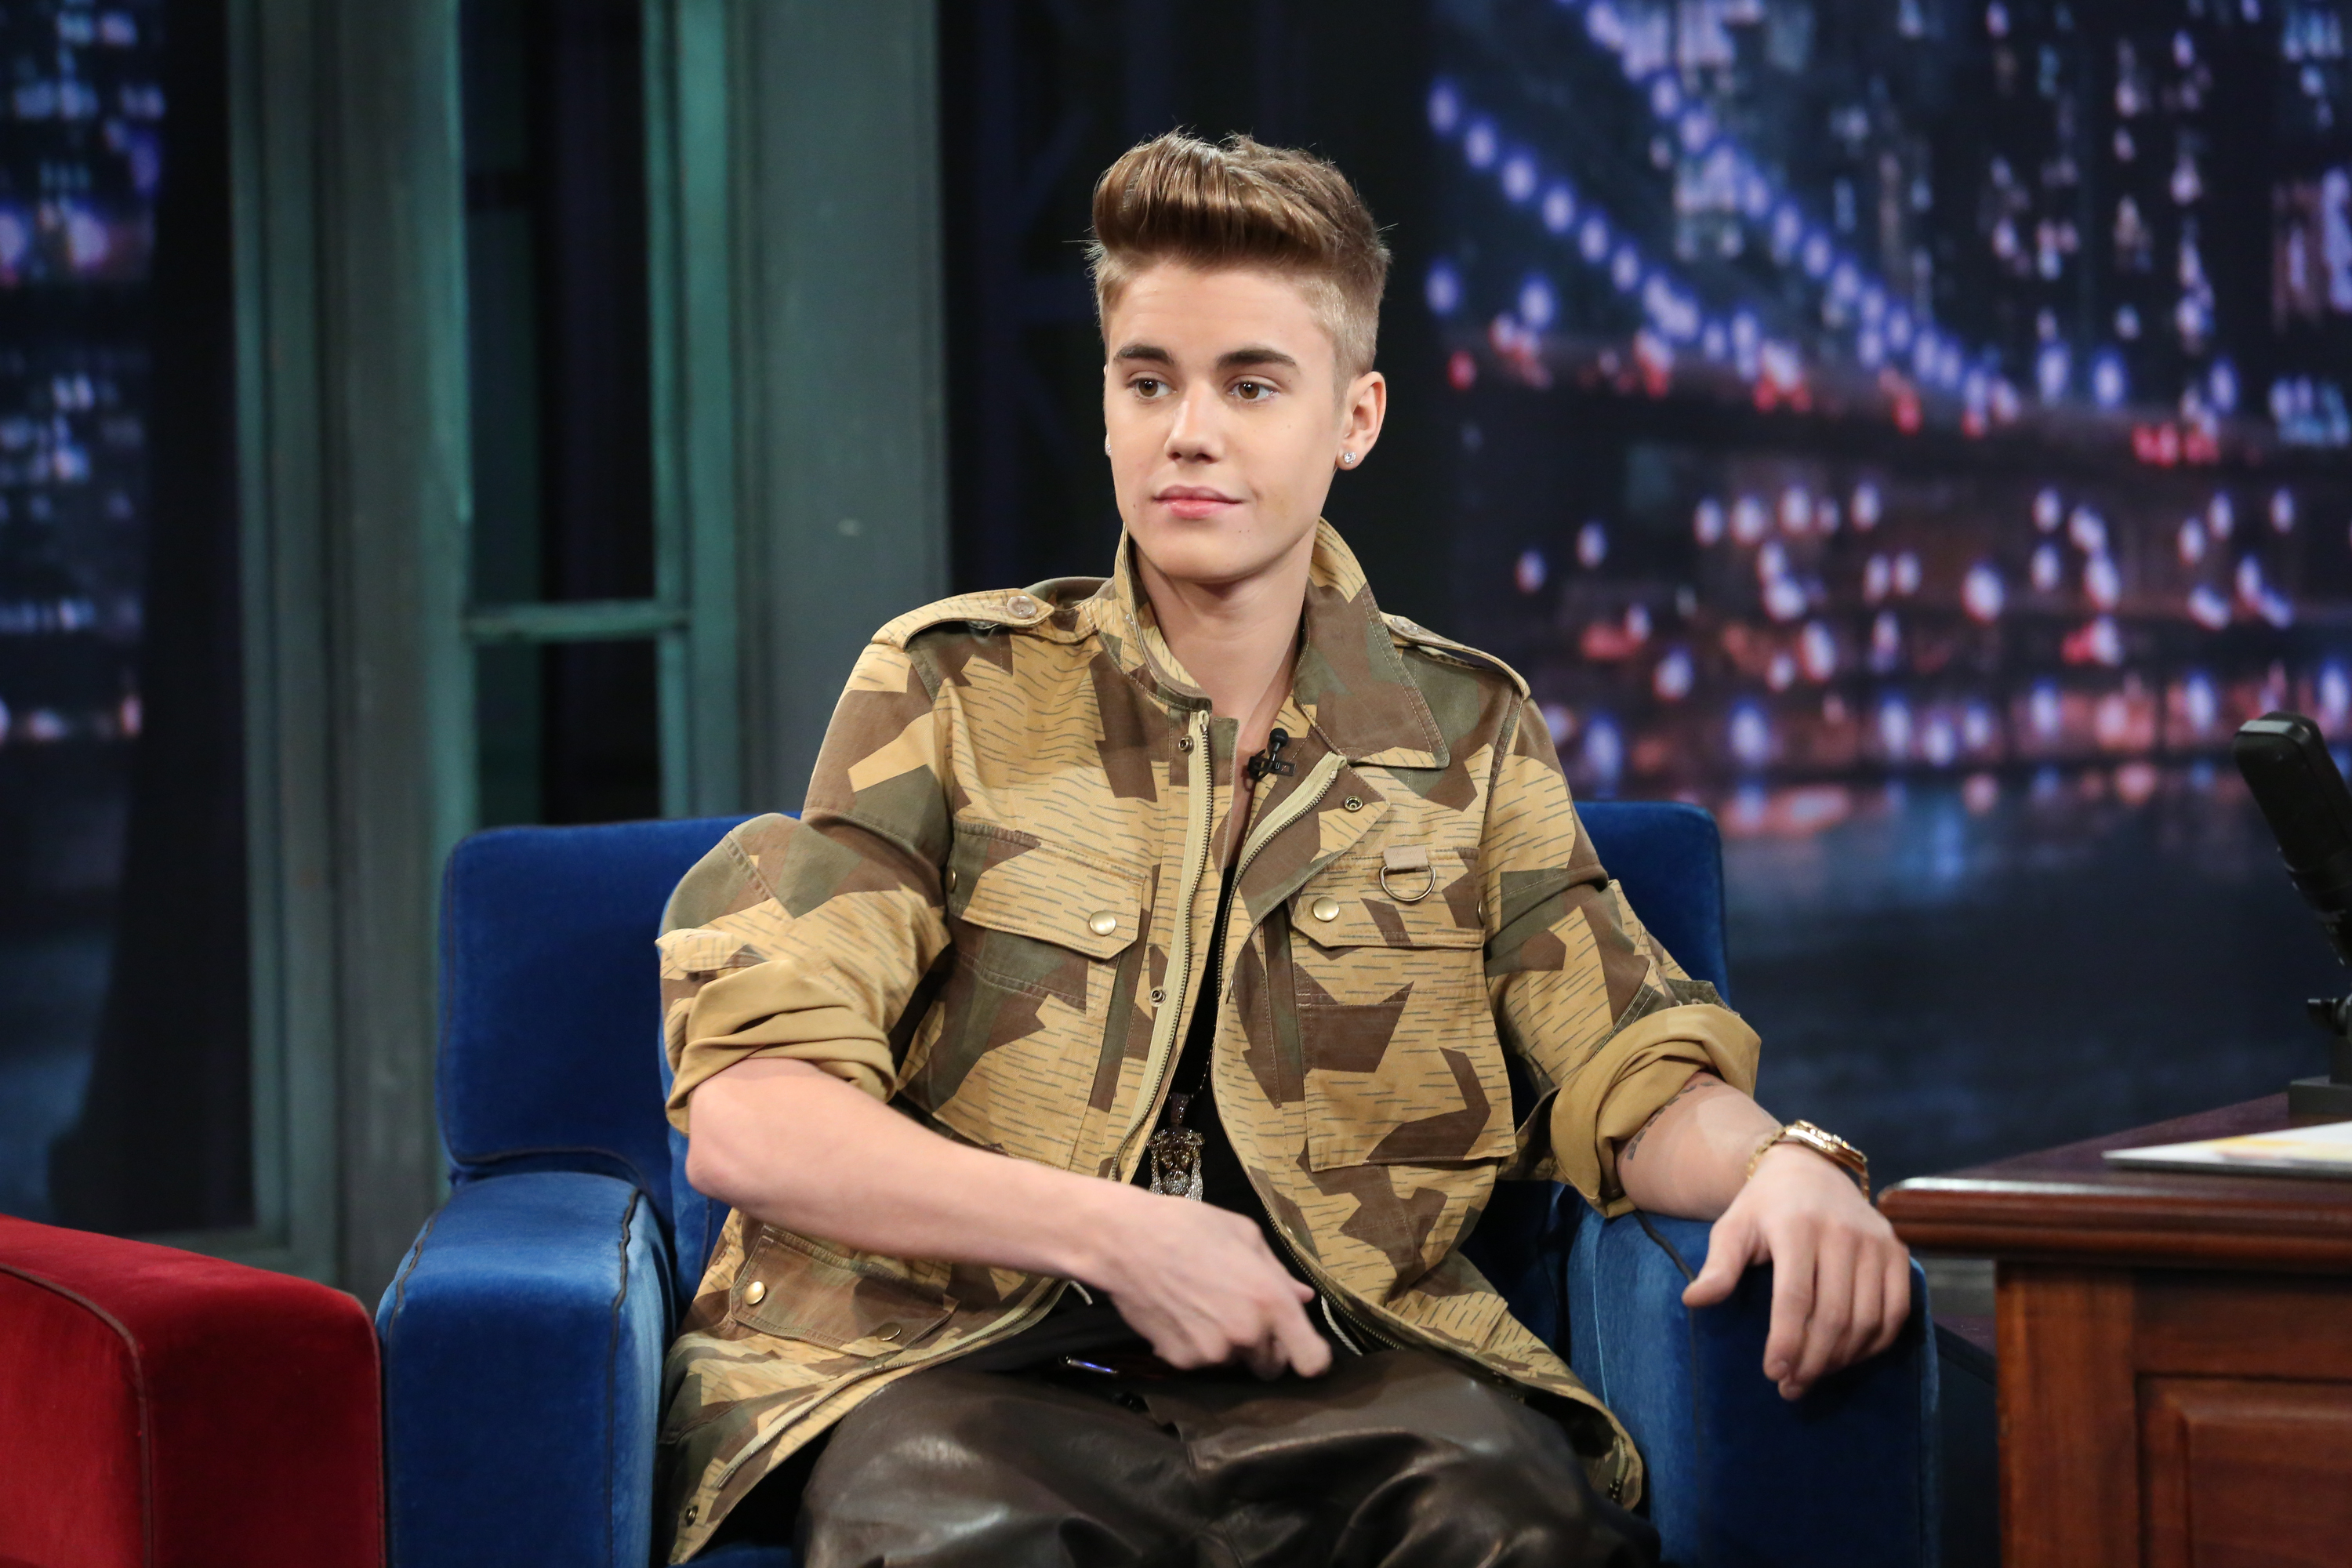 Close-up of Justin as a teen on a talk show